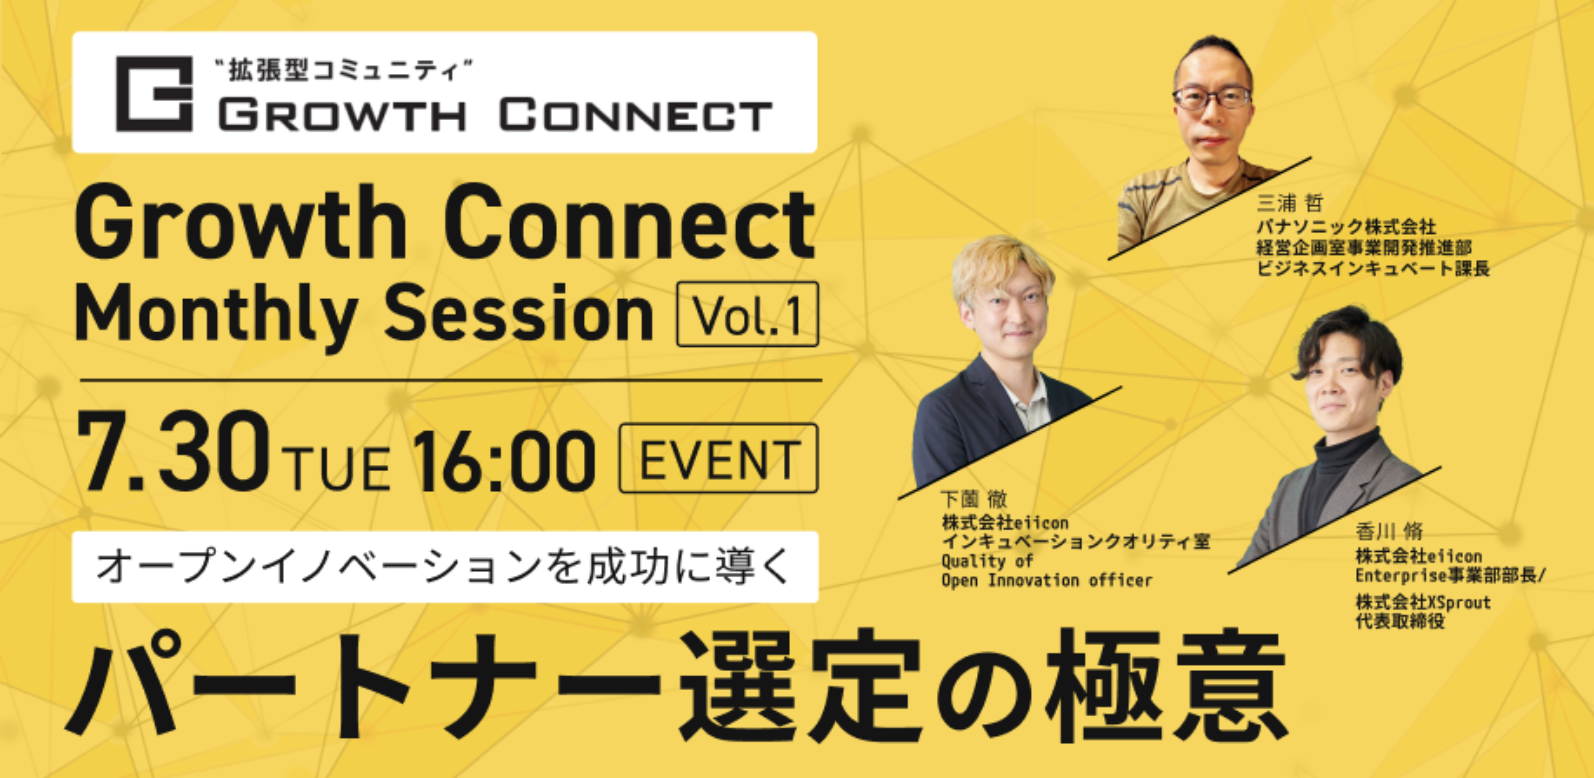 「Growth Connect Monthly Session」の第1回イベント「パートナー選定の極意」に登壇決定